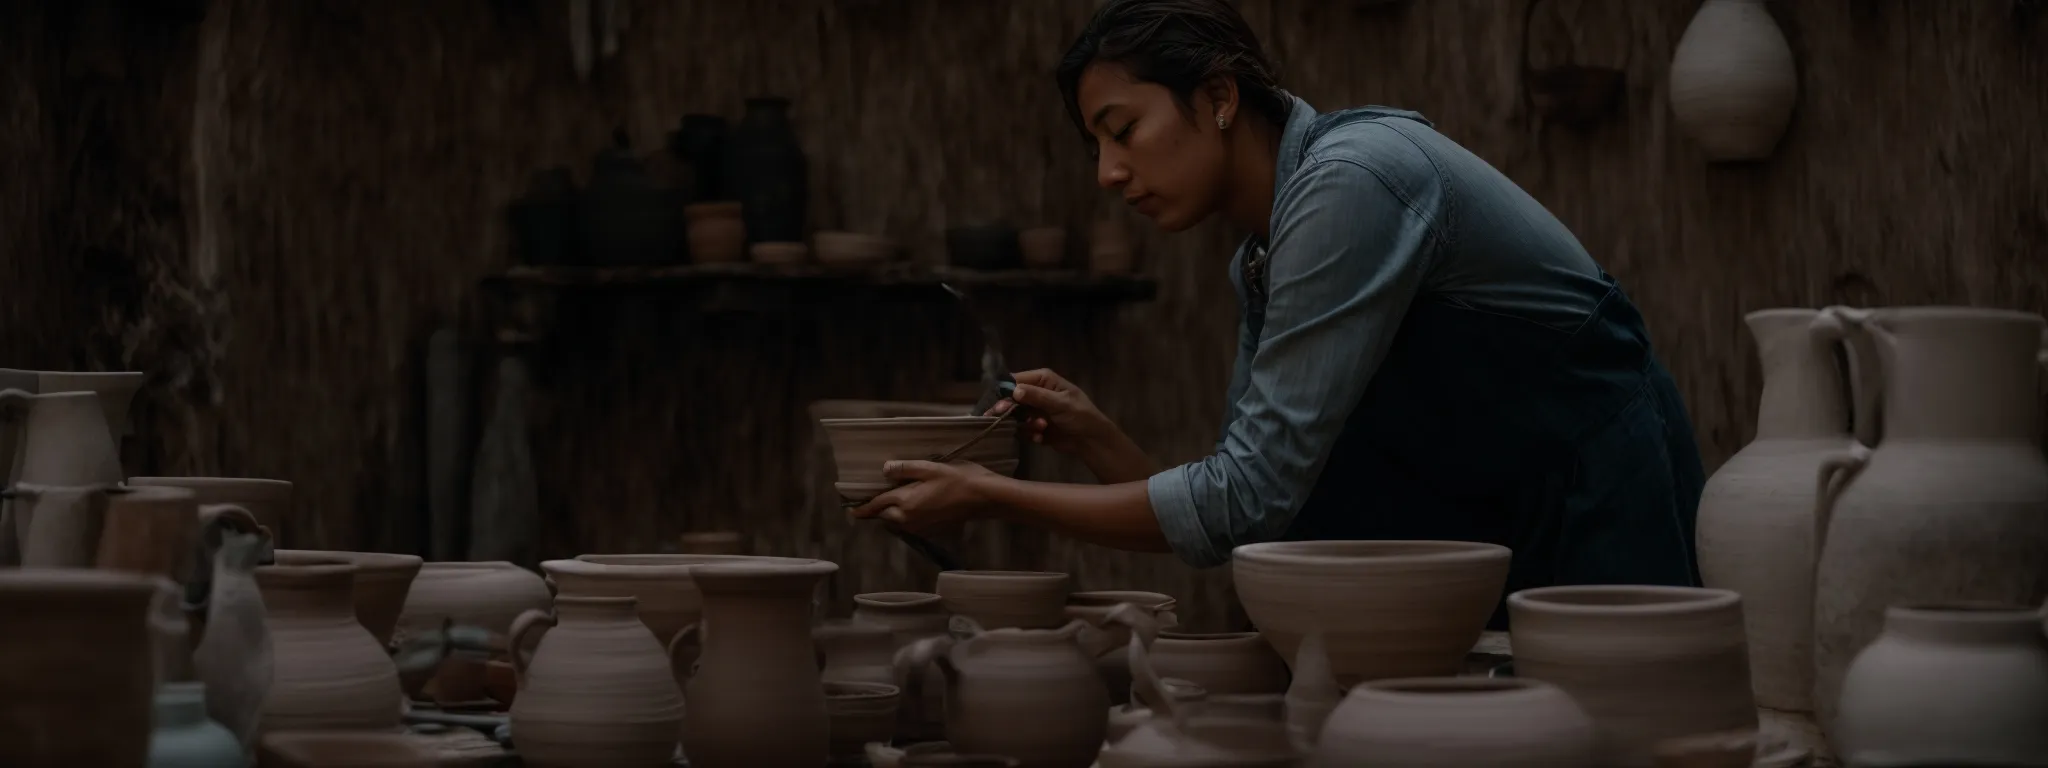 a traveler engages in a pottery workshop with a local artisan in a rustic village setting.